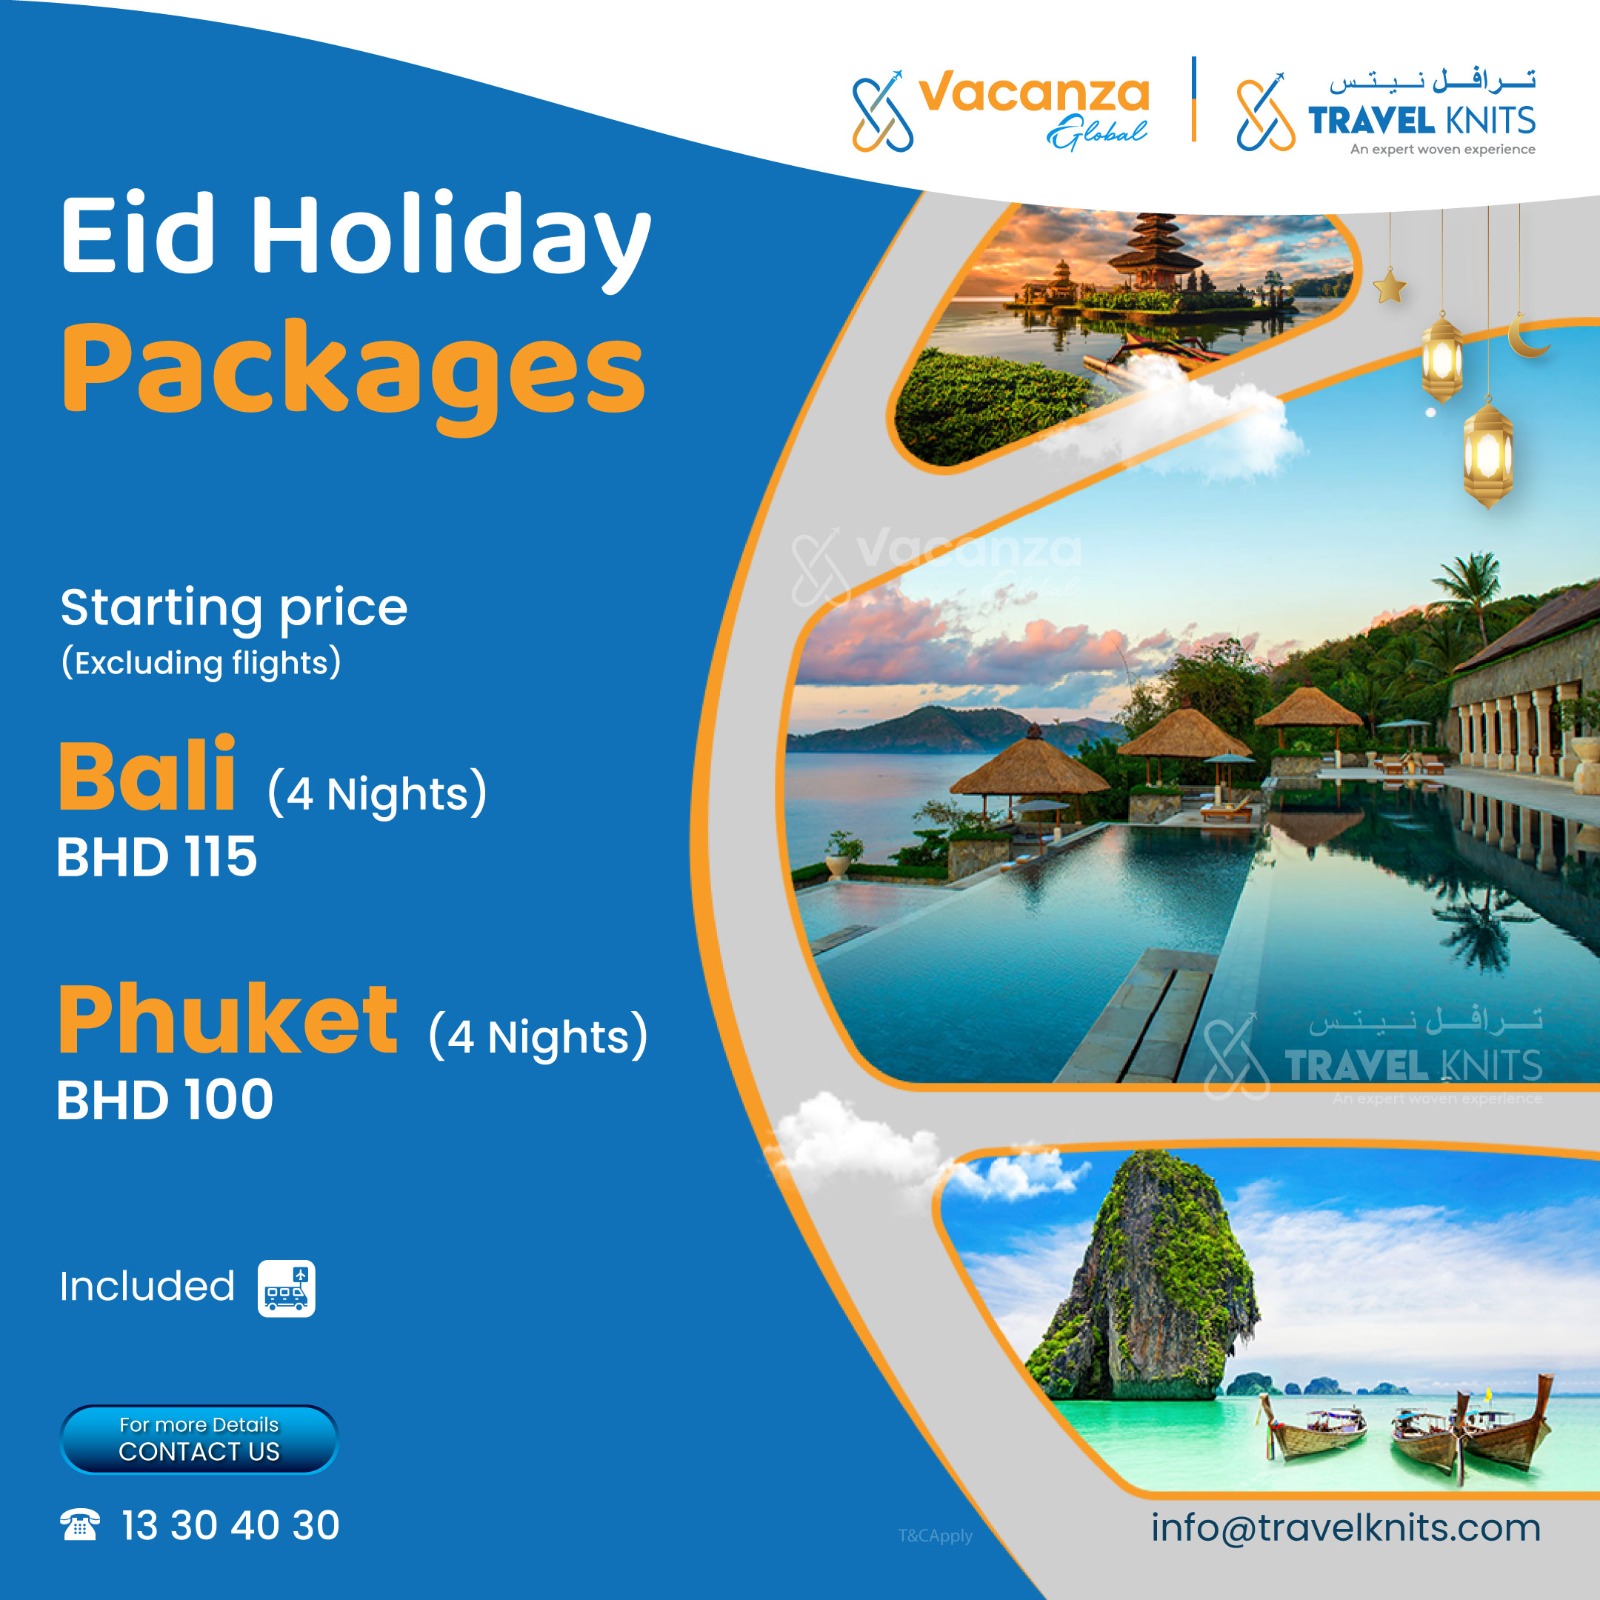 EID PACKAGE|ThailandTour Packages - Book honeymoon ,family,adventure tour packages to Thailand|Travel Knits												